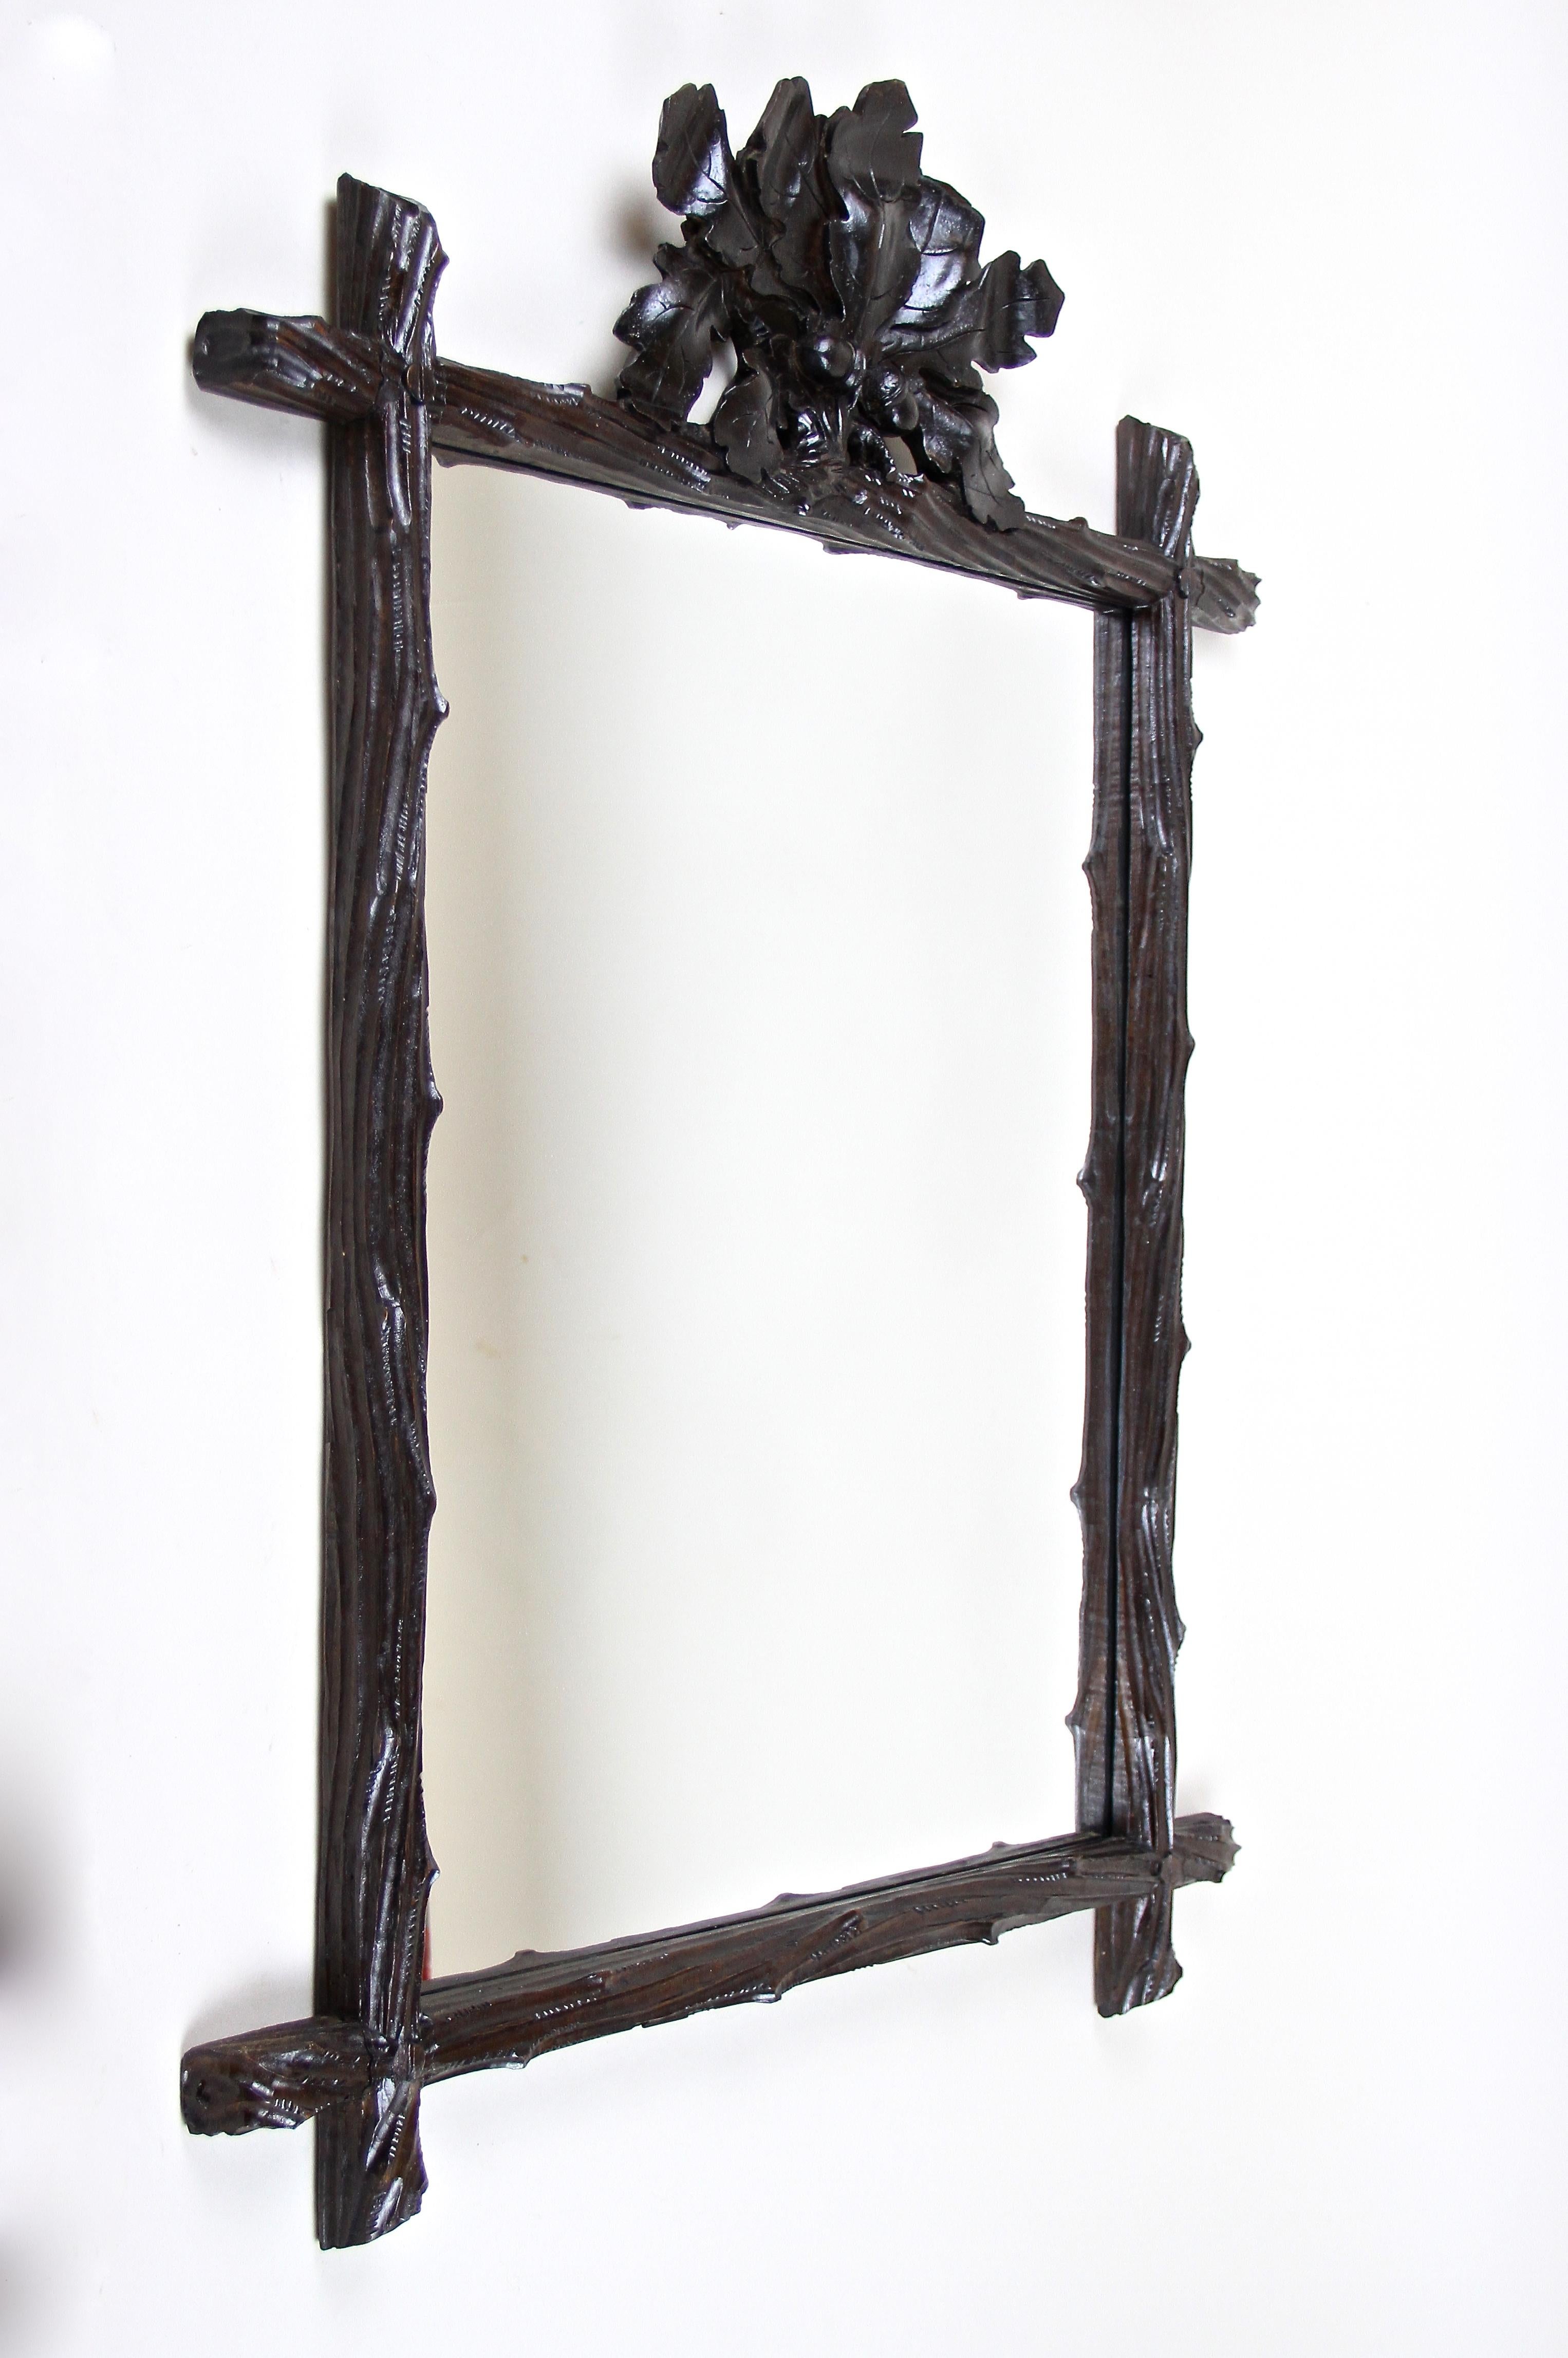 Exceptional black forest mirror from the late 19th century in Austria around 1870. This phenomenal, elaborately hand carved rustic wall mirror impresses with its simple but artfully designed 